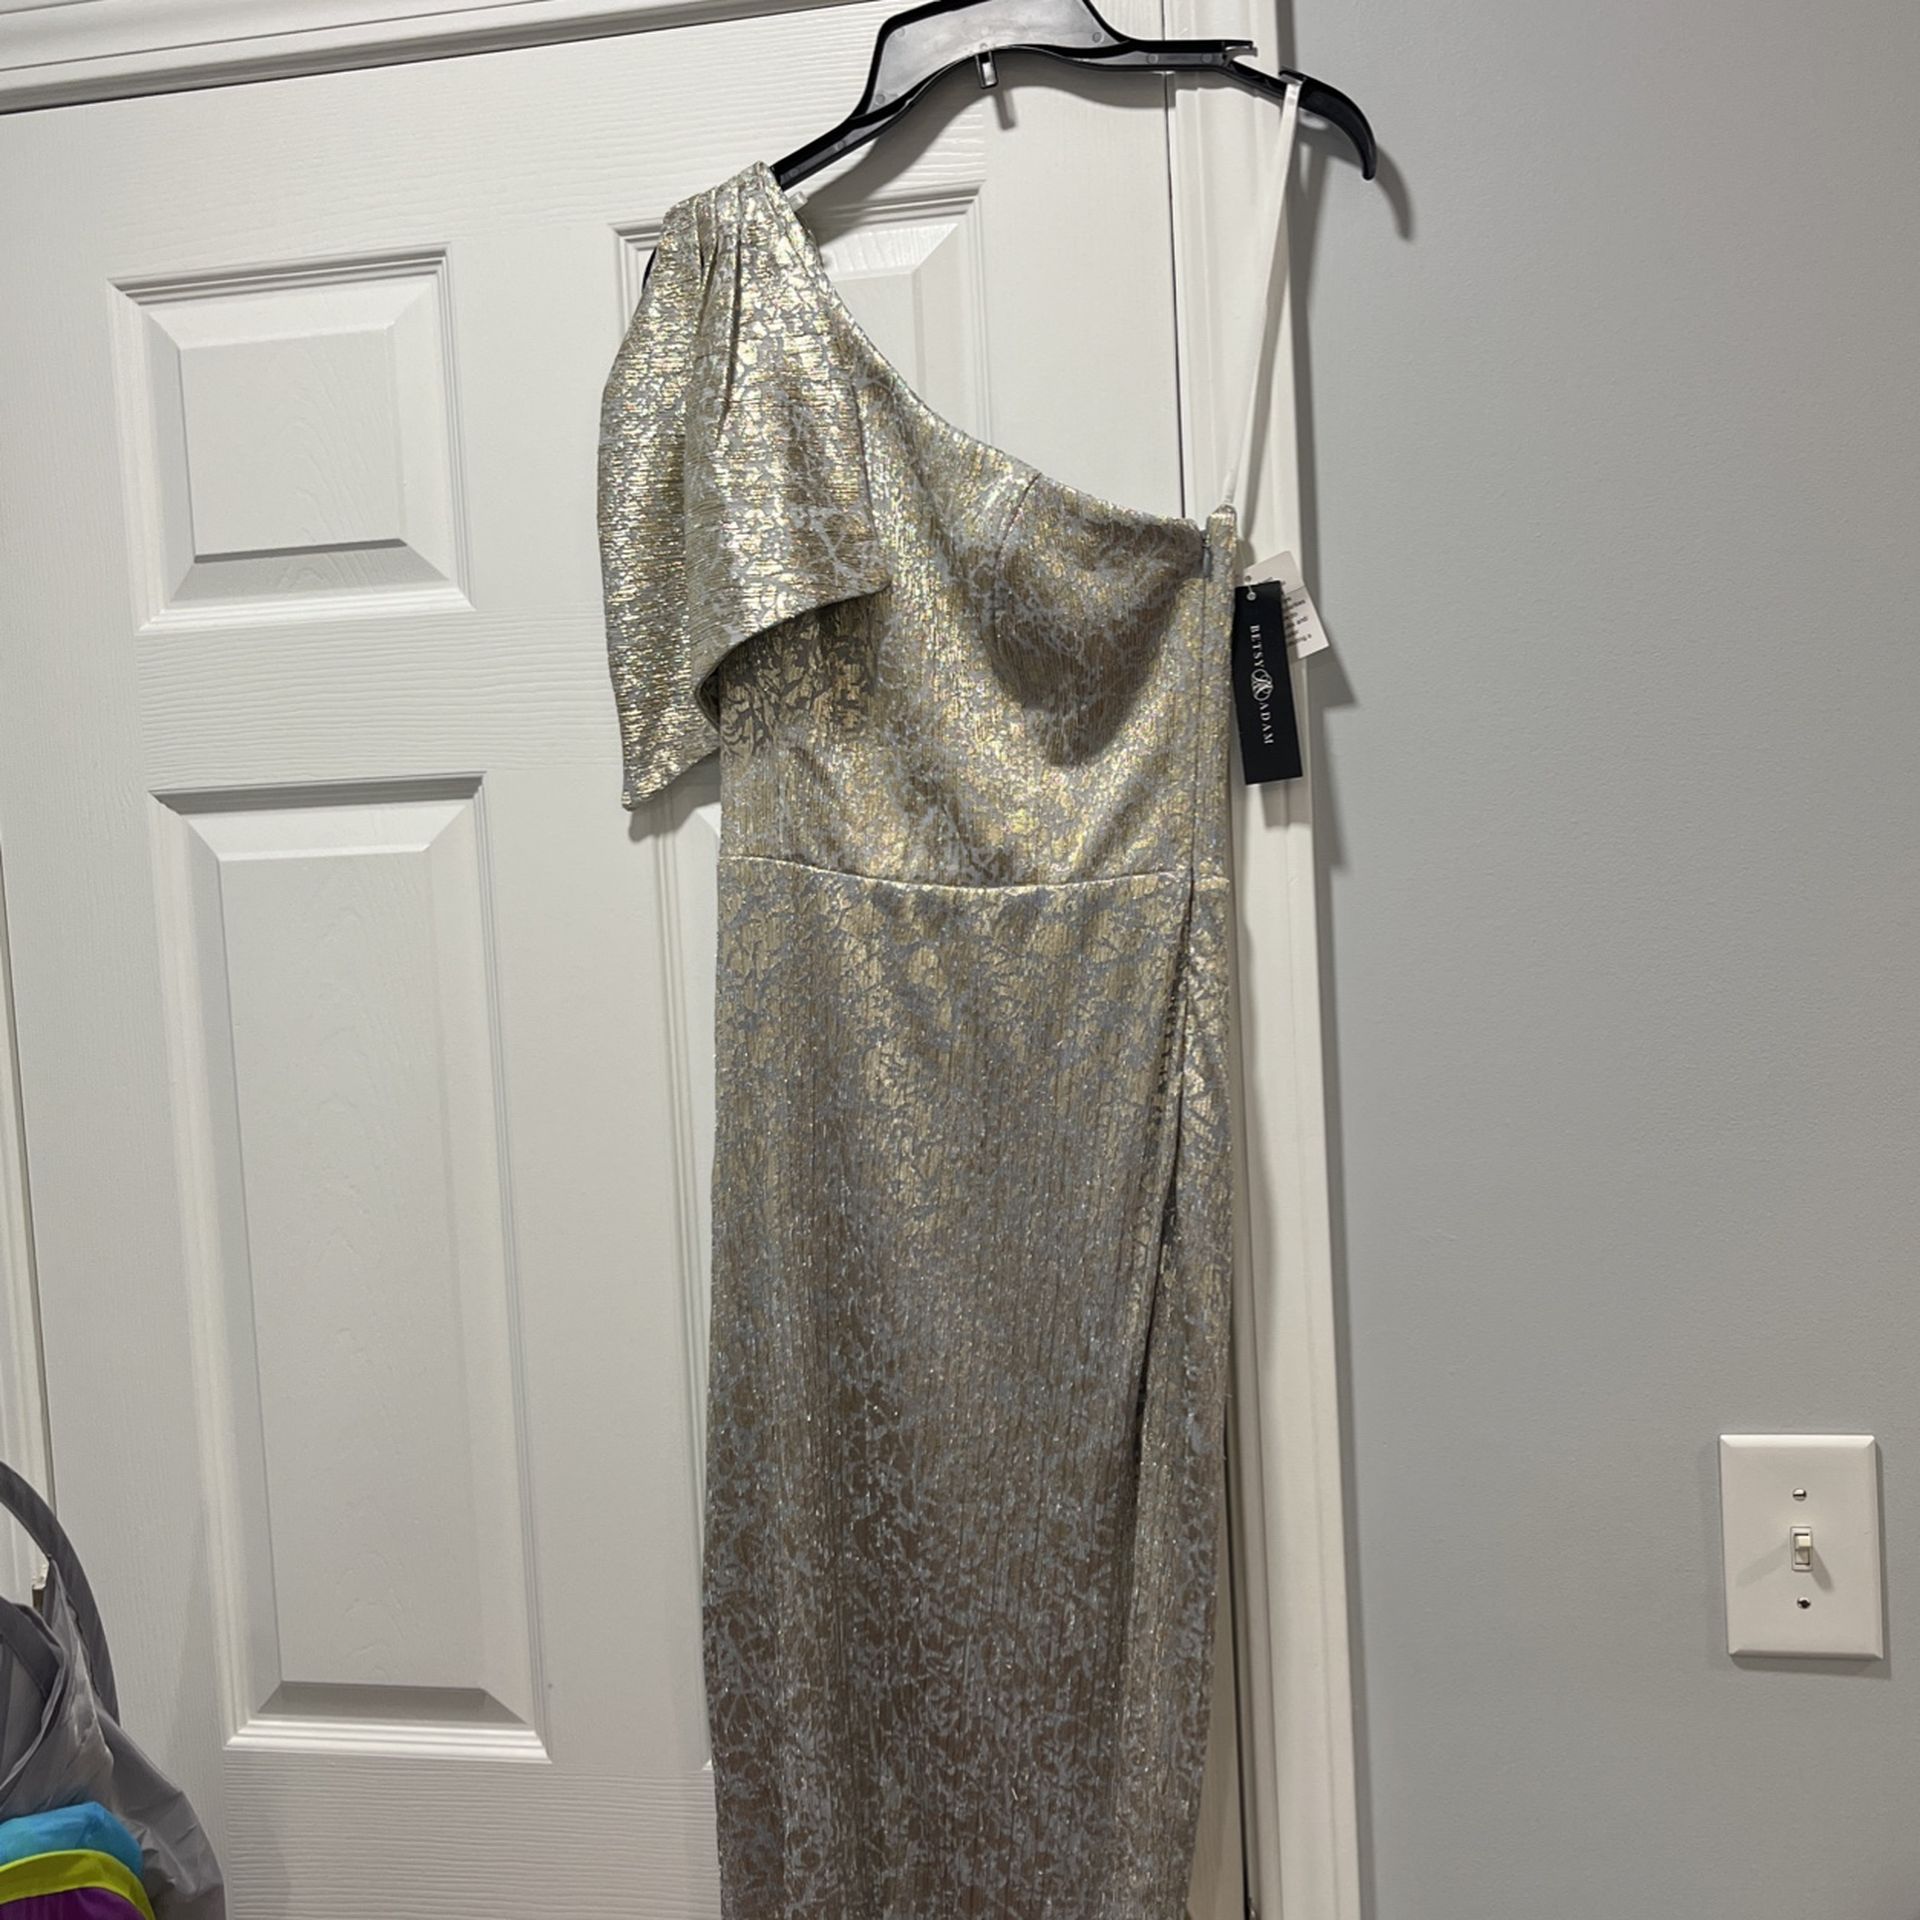 silver cocktail dress